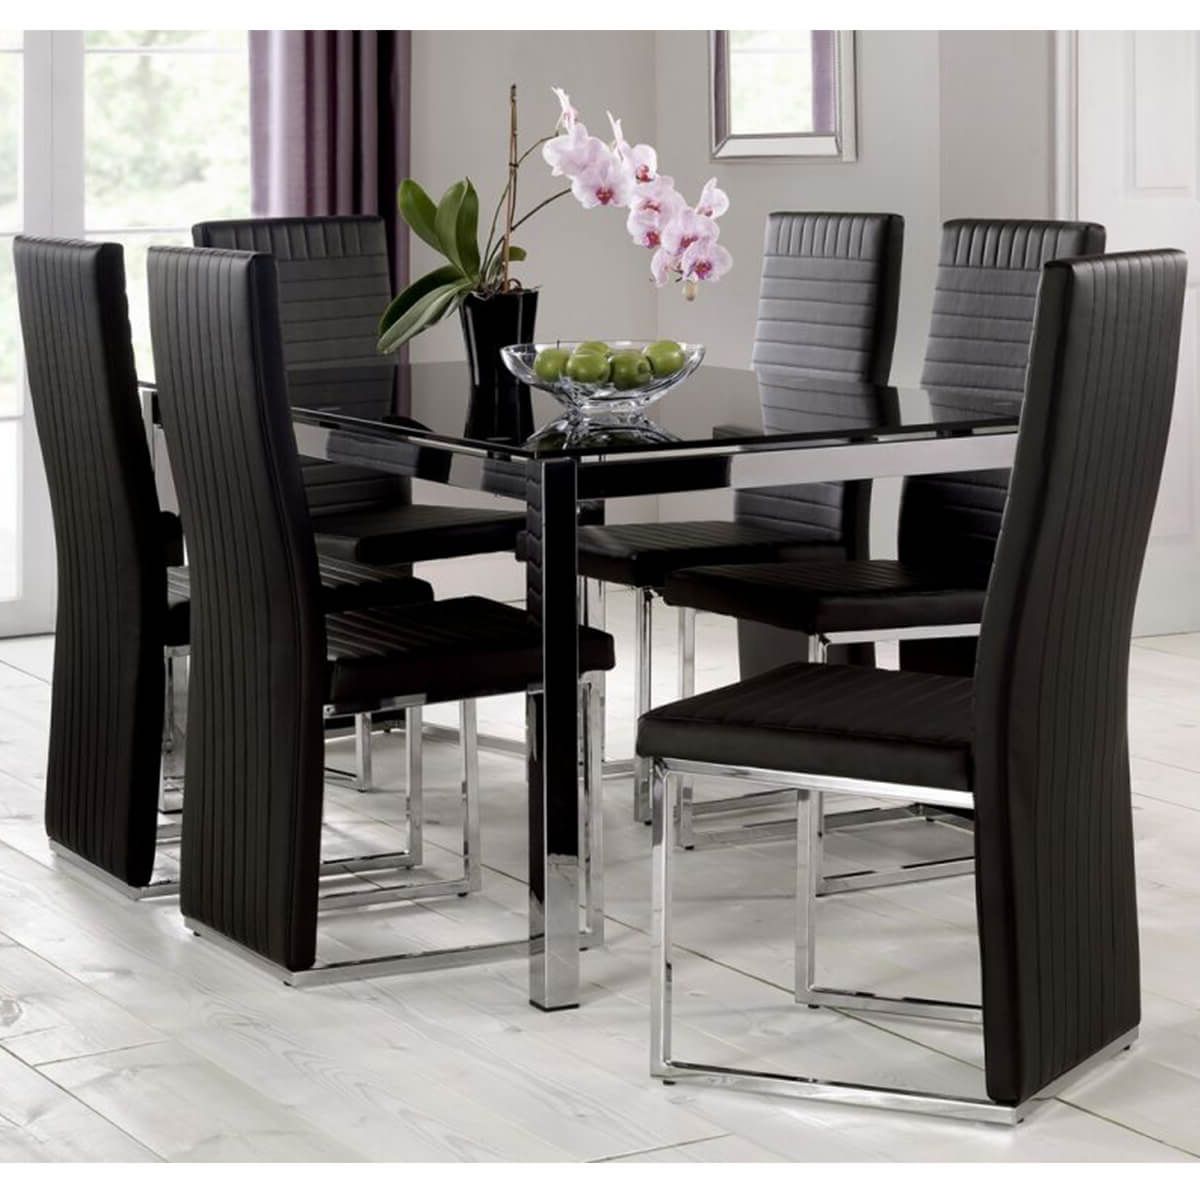 Contemporary 6 Seating Rectangular Dining Tables Inside Most Up To Date Tempo Black Dining Table With Black Chairs (View 8 of 25)